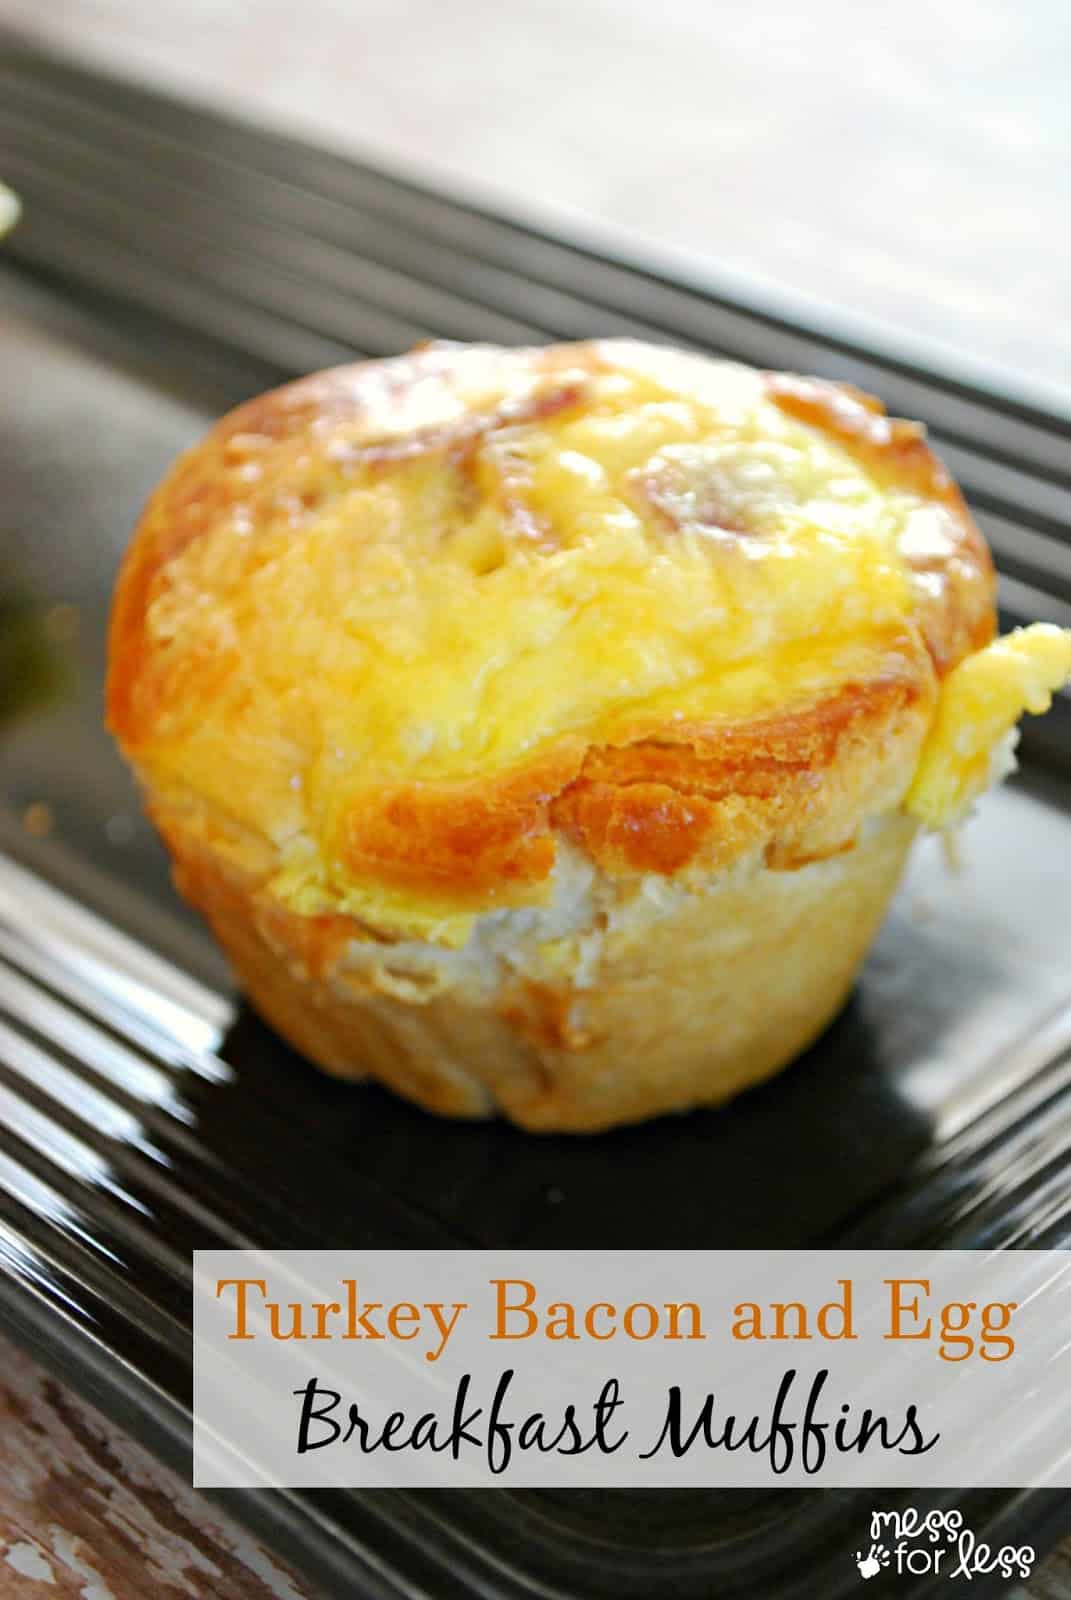 Turkey Bacon and Egg Breakfast Muffins made with Butterball Turkey Bacon - I love how these are portion controlled and they remind me of a classic all-American breakfast. 